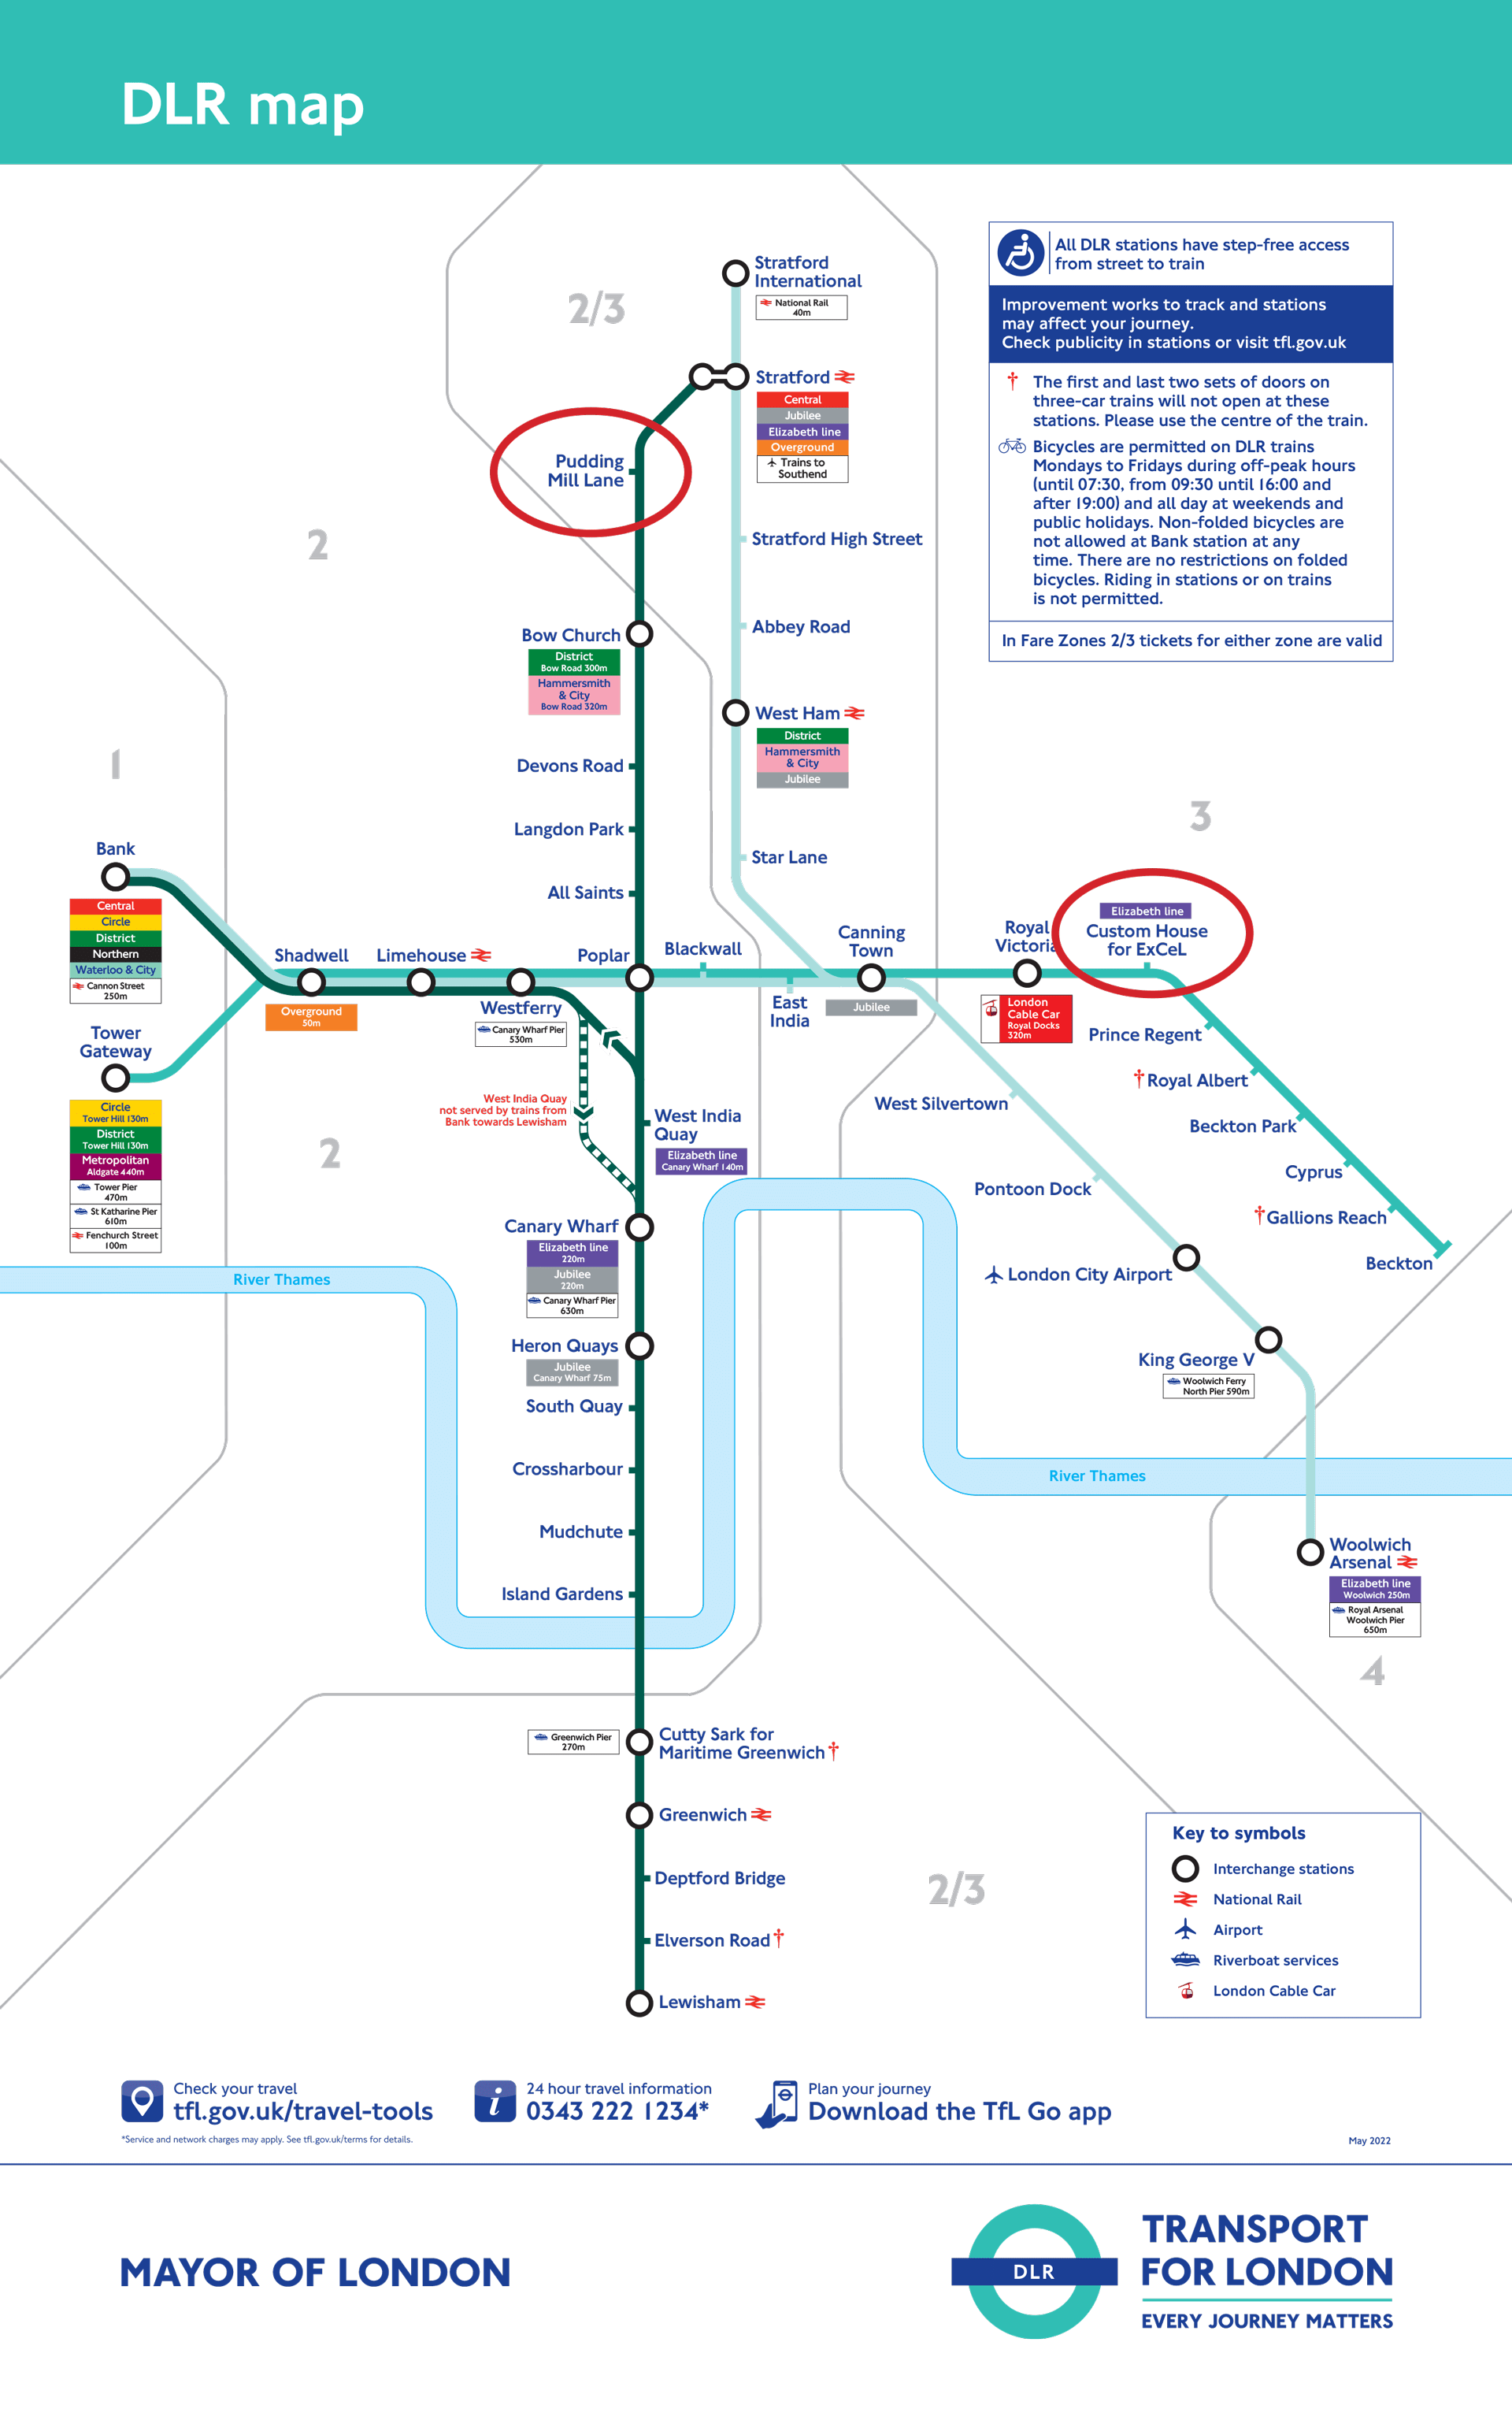 DLR route map